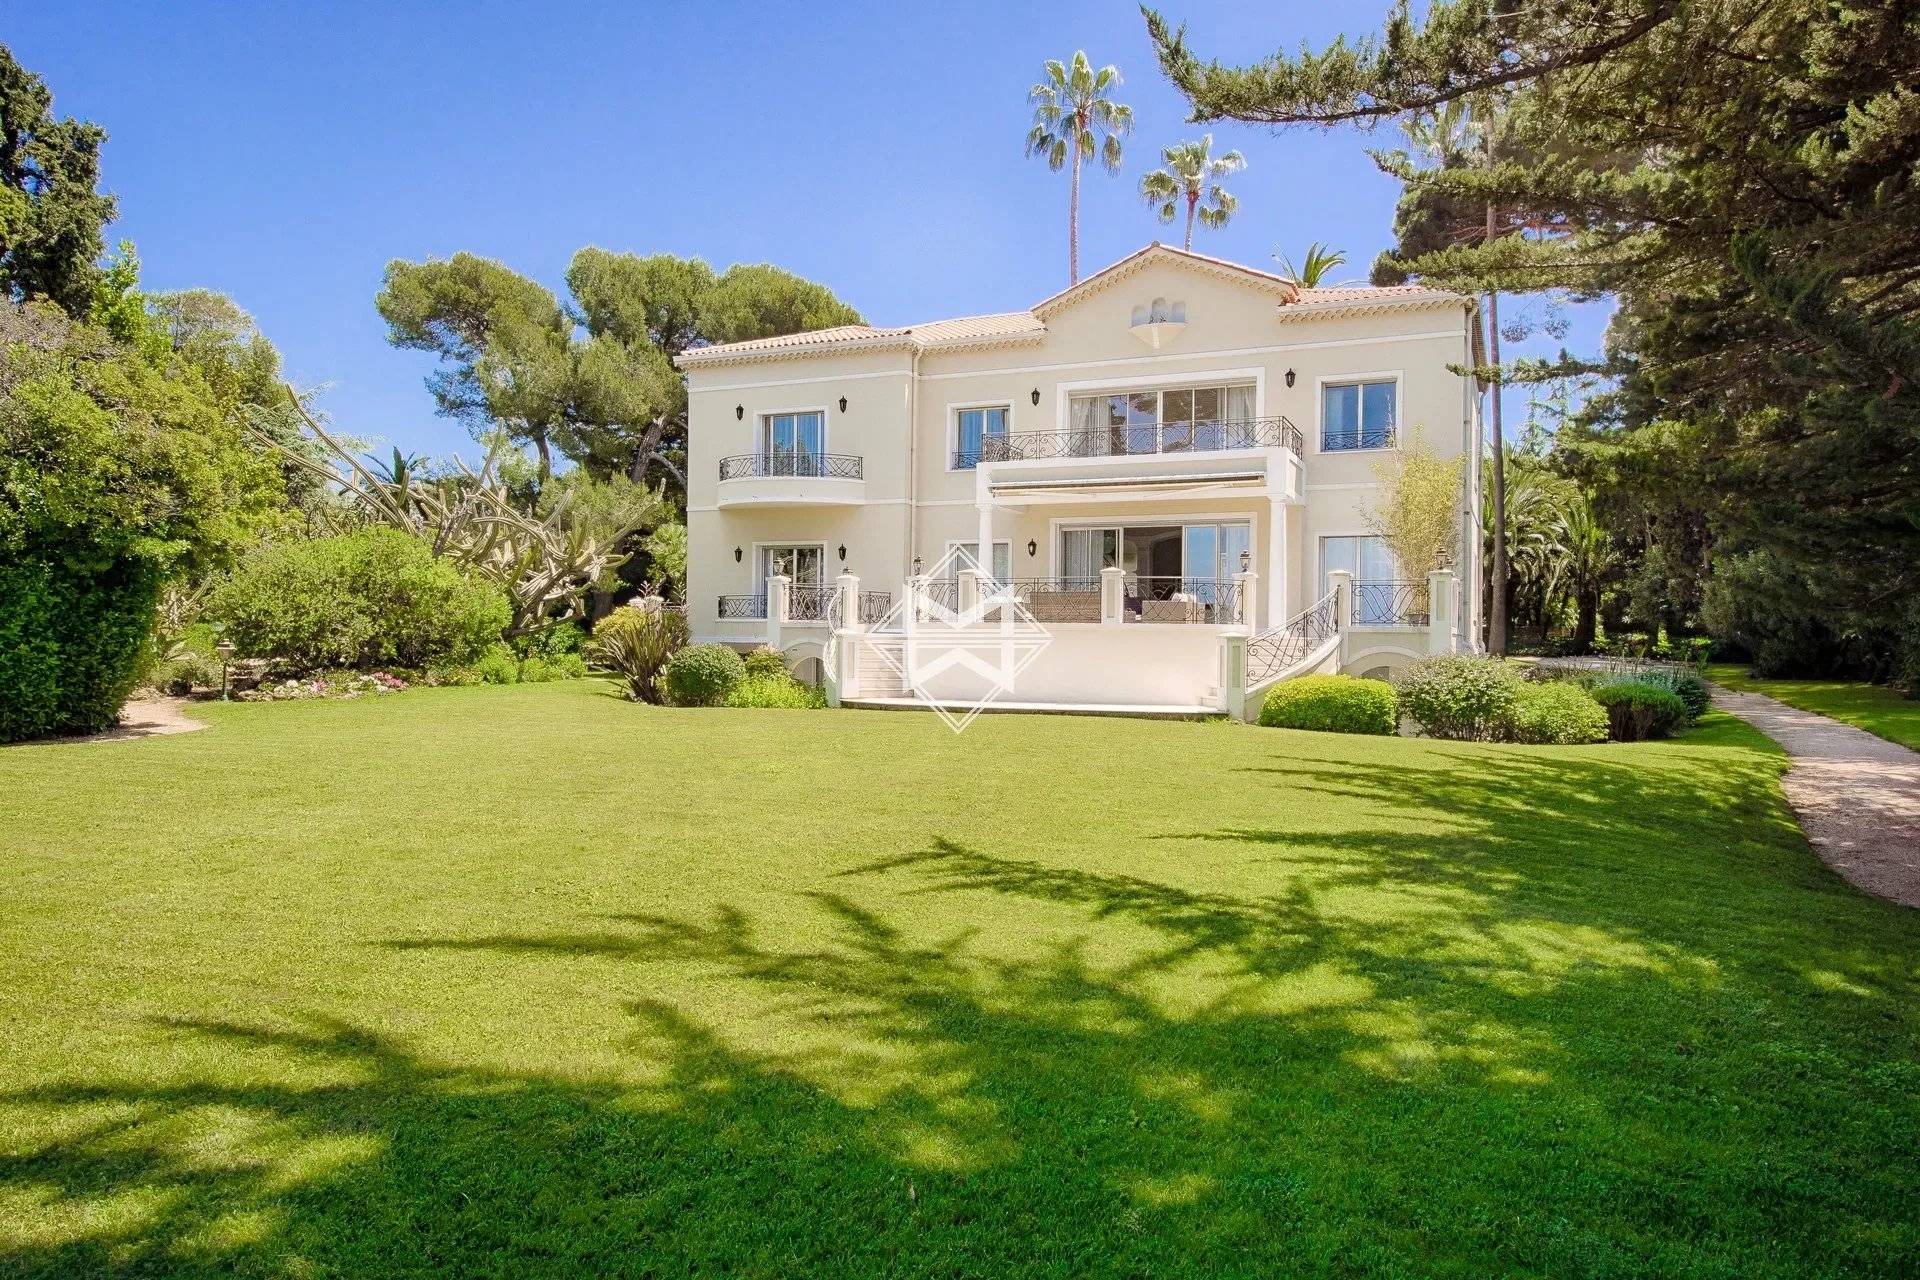 Magnificent villa of about 700 sqm built in the Palladian style located on the seafront